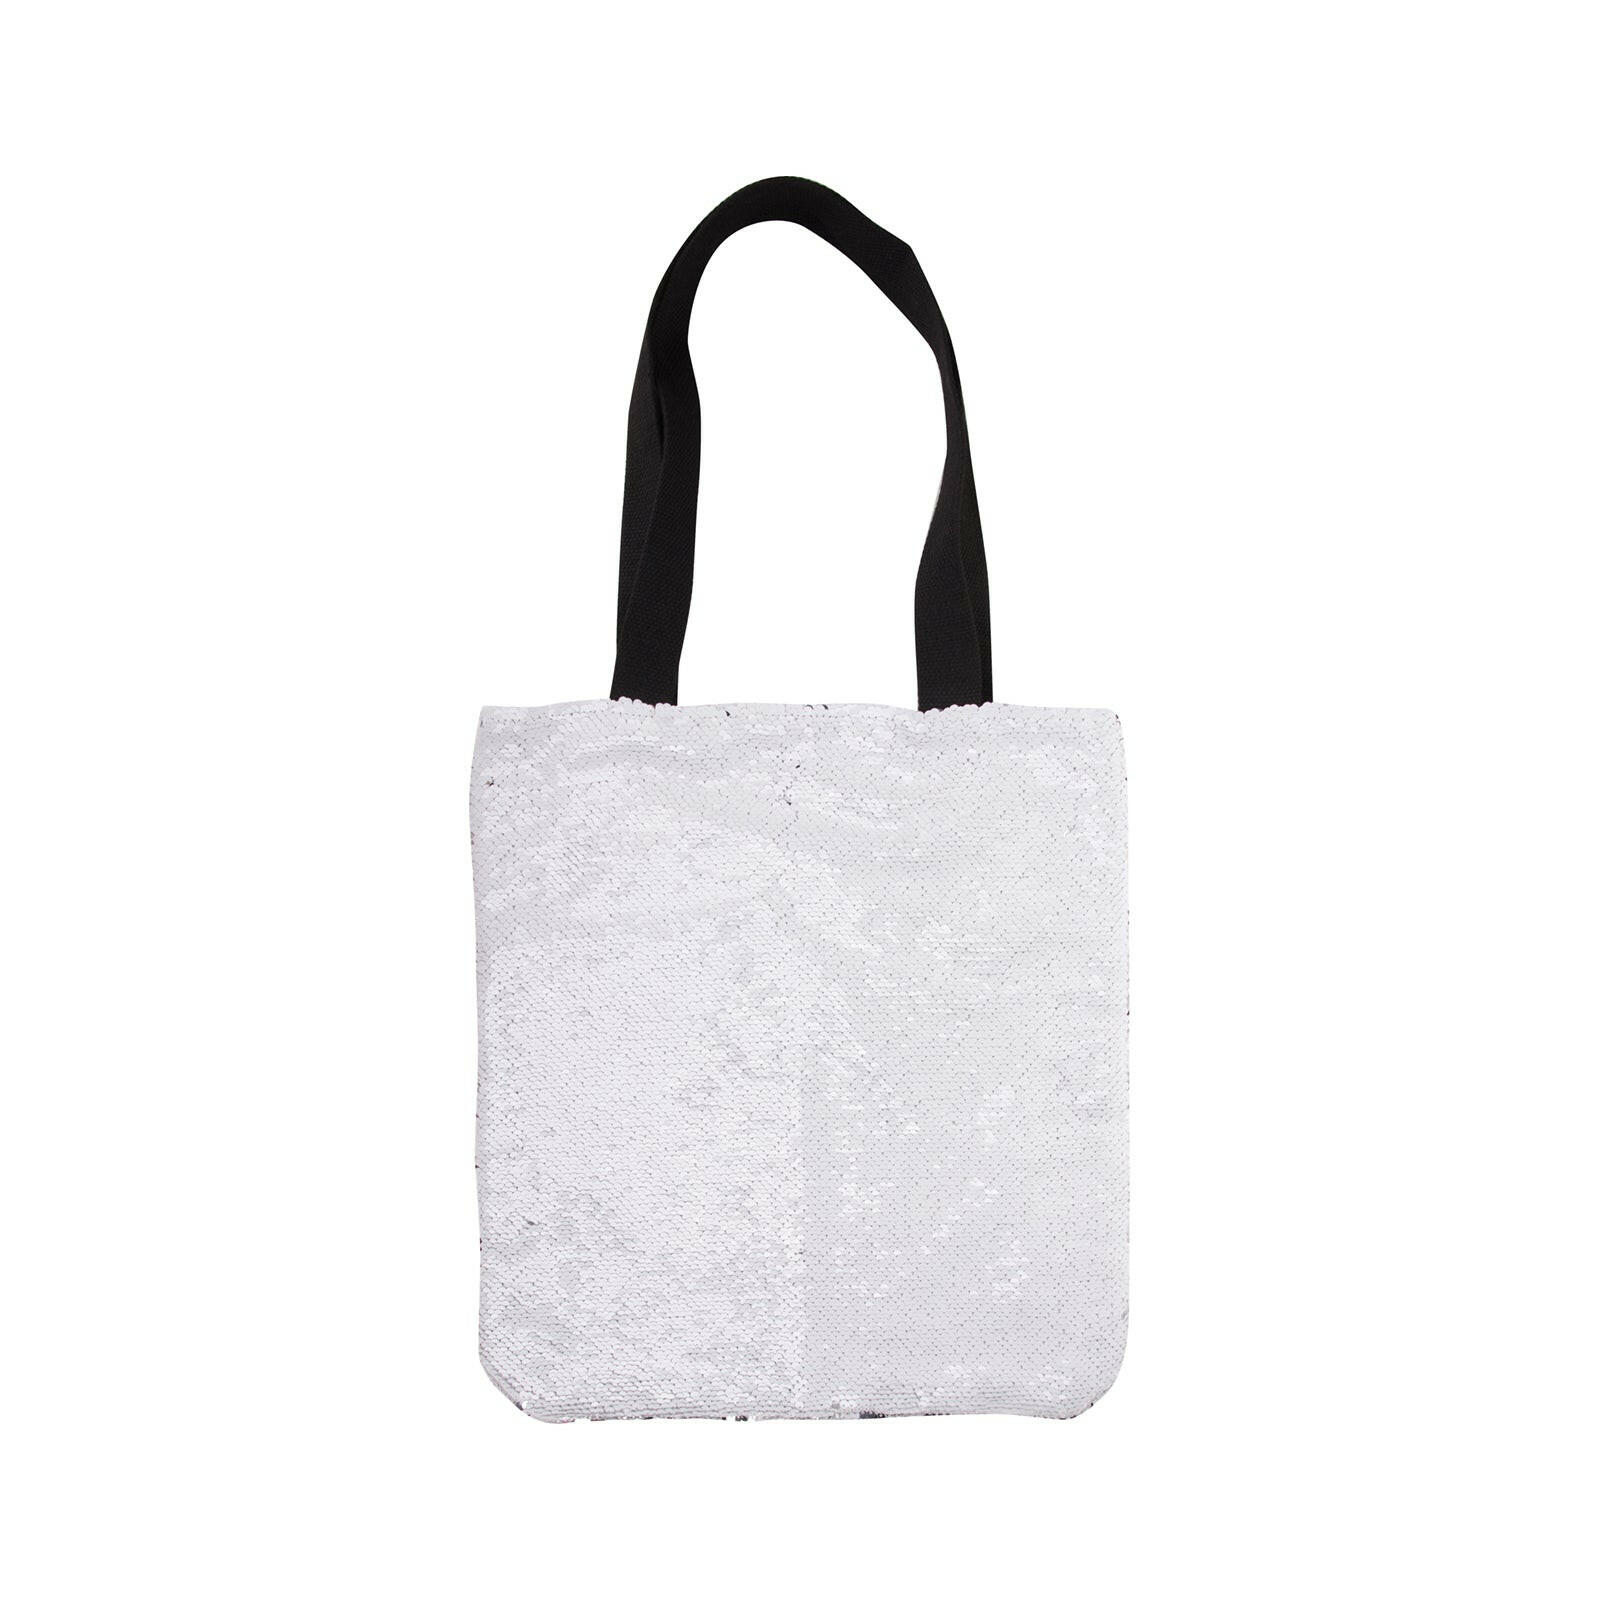 Sublimation Sequin Tote Bags - 2 Pack.